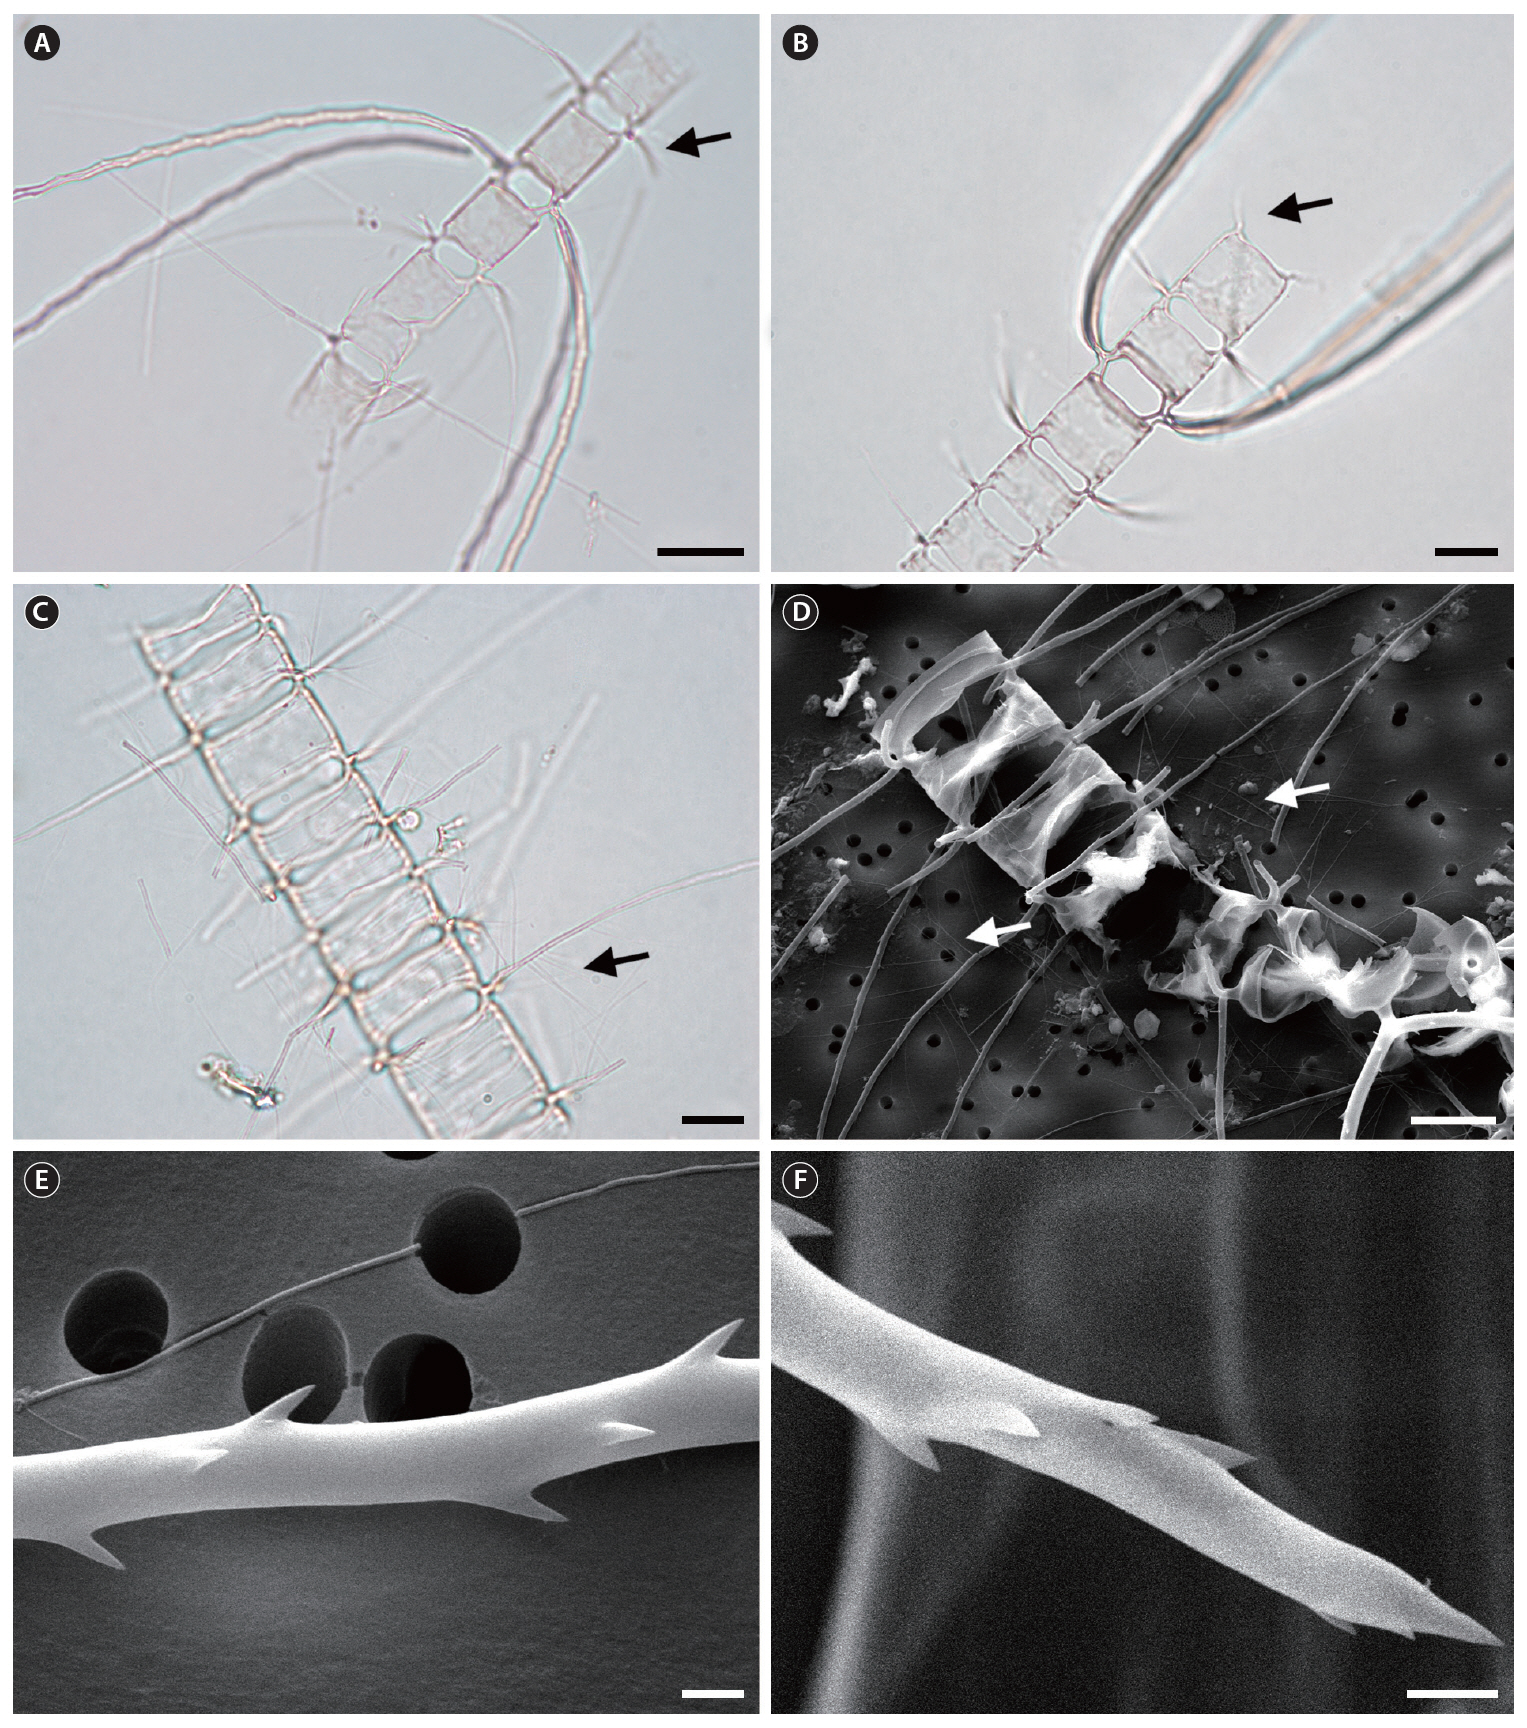 Chaetoceros compressus var. hirtisetus (A-C light microscope; D-F scanning electron microscope). (A) Partial colony with special and common intercalary setae which have thin fine capilli (arrow). (B) Partial colony in broad girdle view showing shapes of foramina and terminal setae (arrow). (C & D) Common intercalary setae with thin fine capilli (arrows). (E) Special intercalary setae with spiral spines. (F) Tip of tapering special intercalary setae with spiral spines. Scale bars represent: A-D 10 ㎛; E & F 1 ㎛.